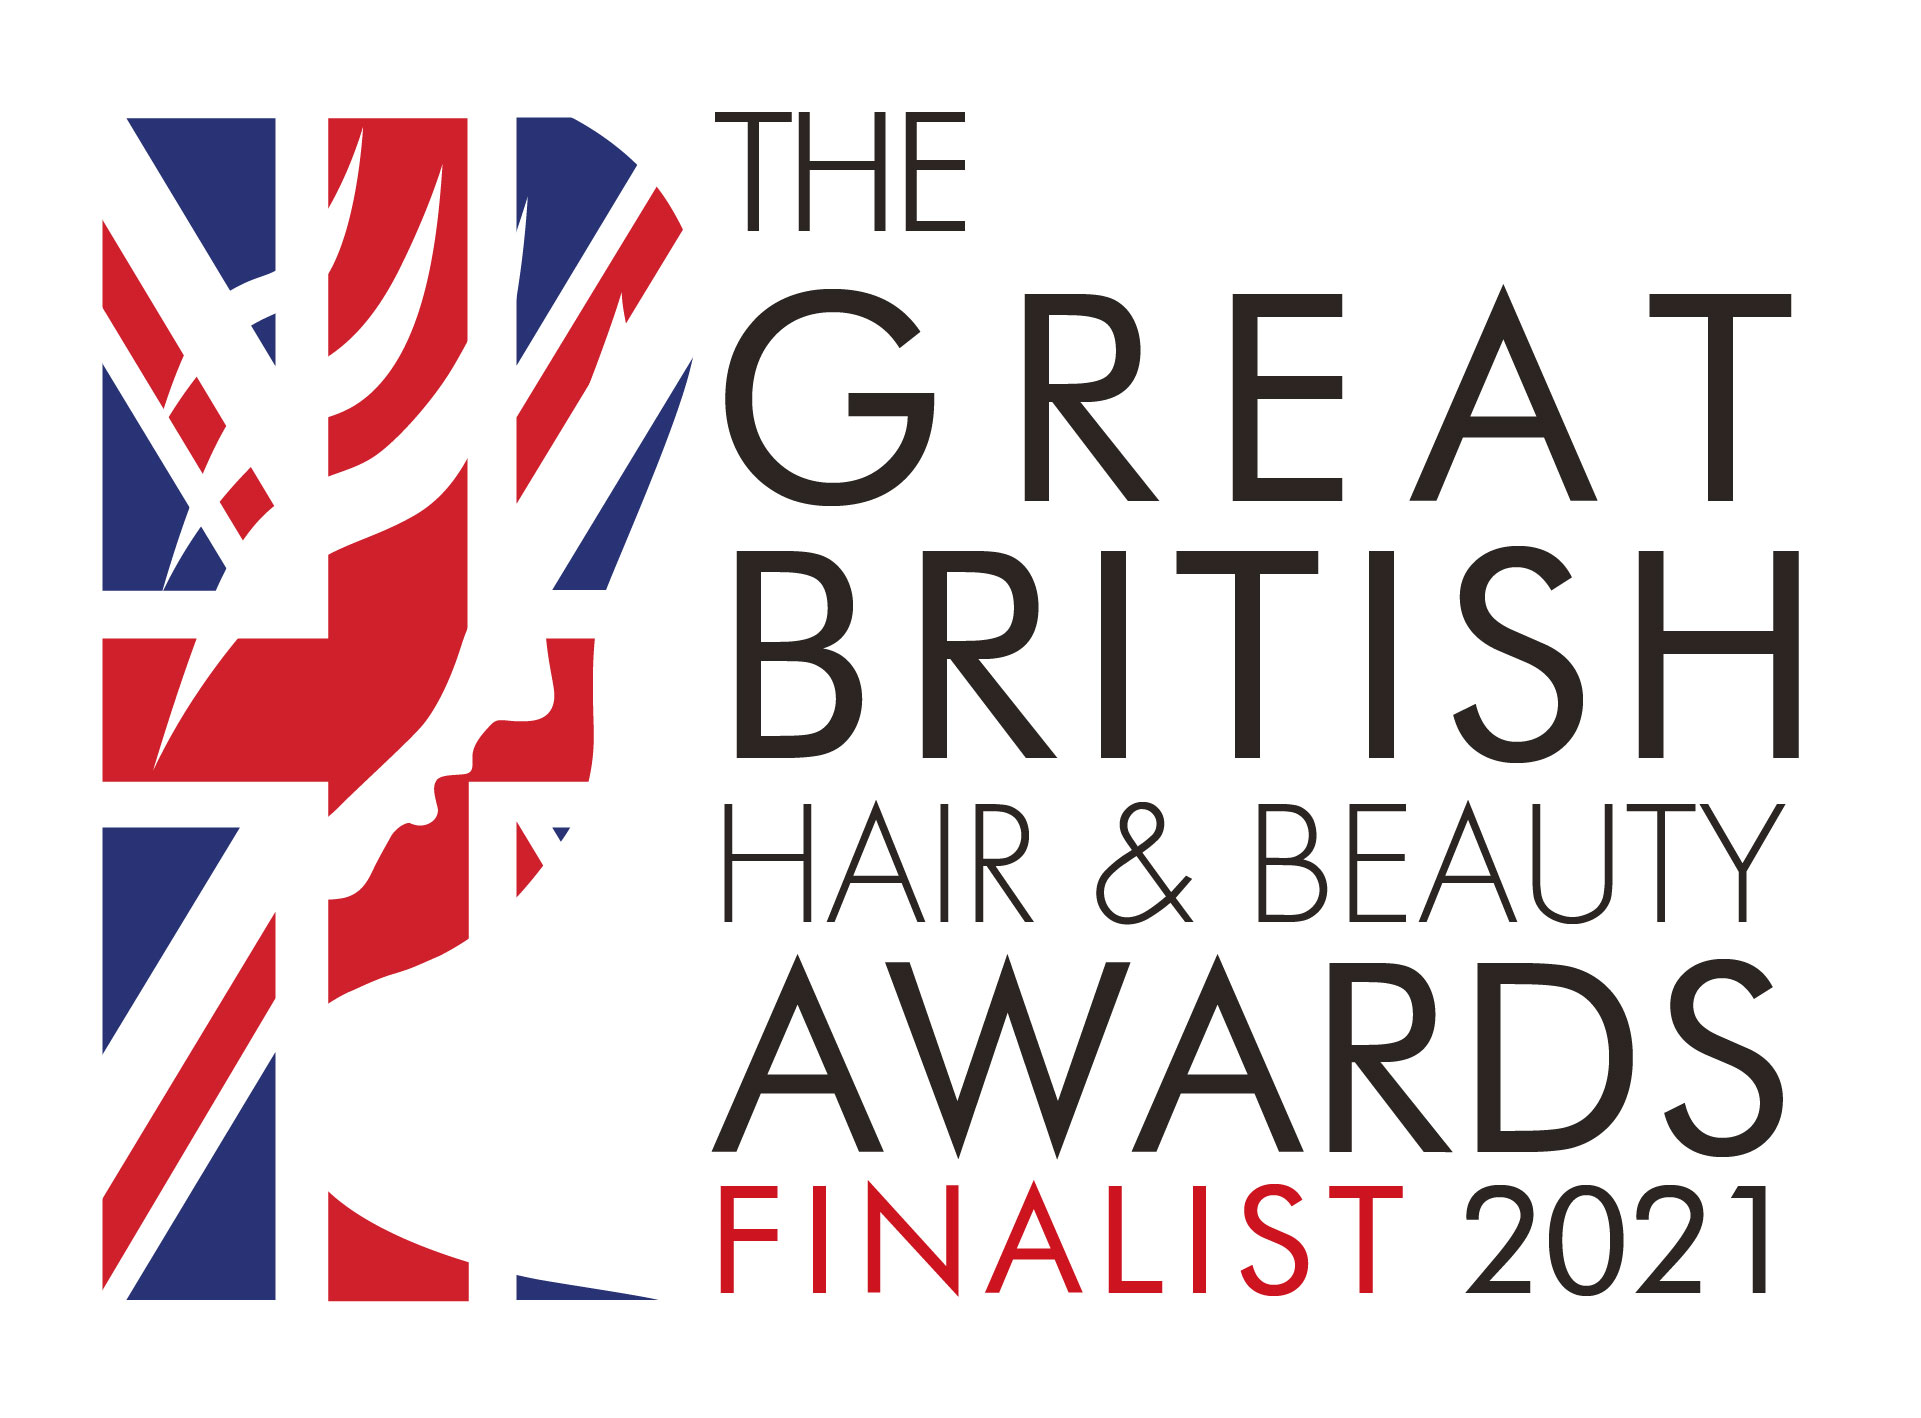 The Great British Hair and Beauty Awards Finalist 2021